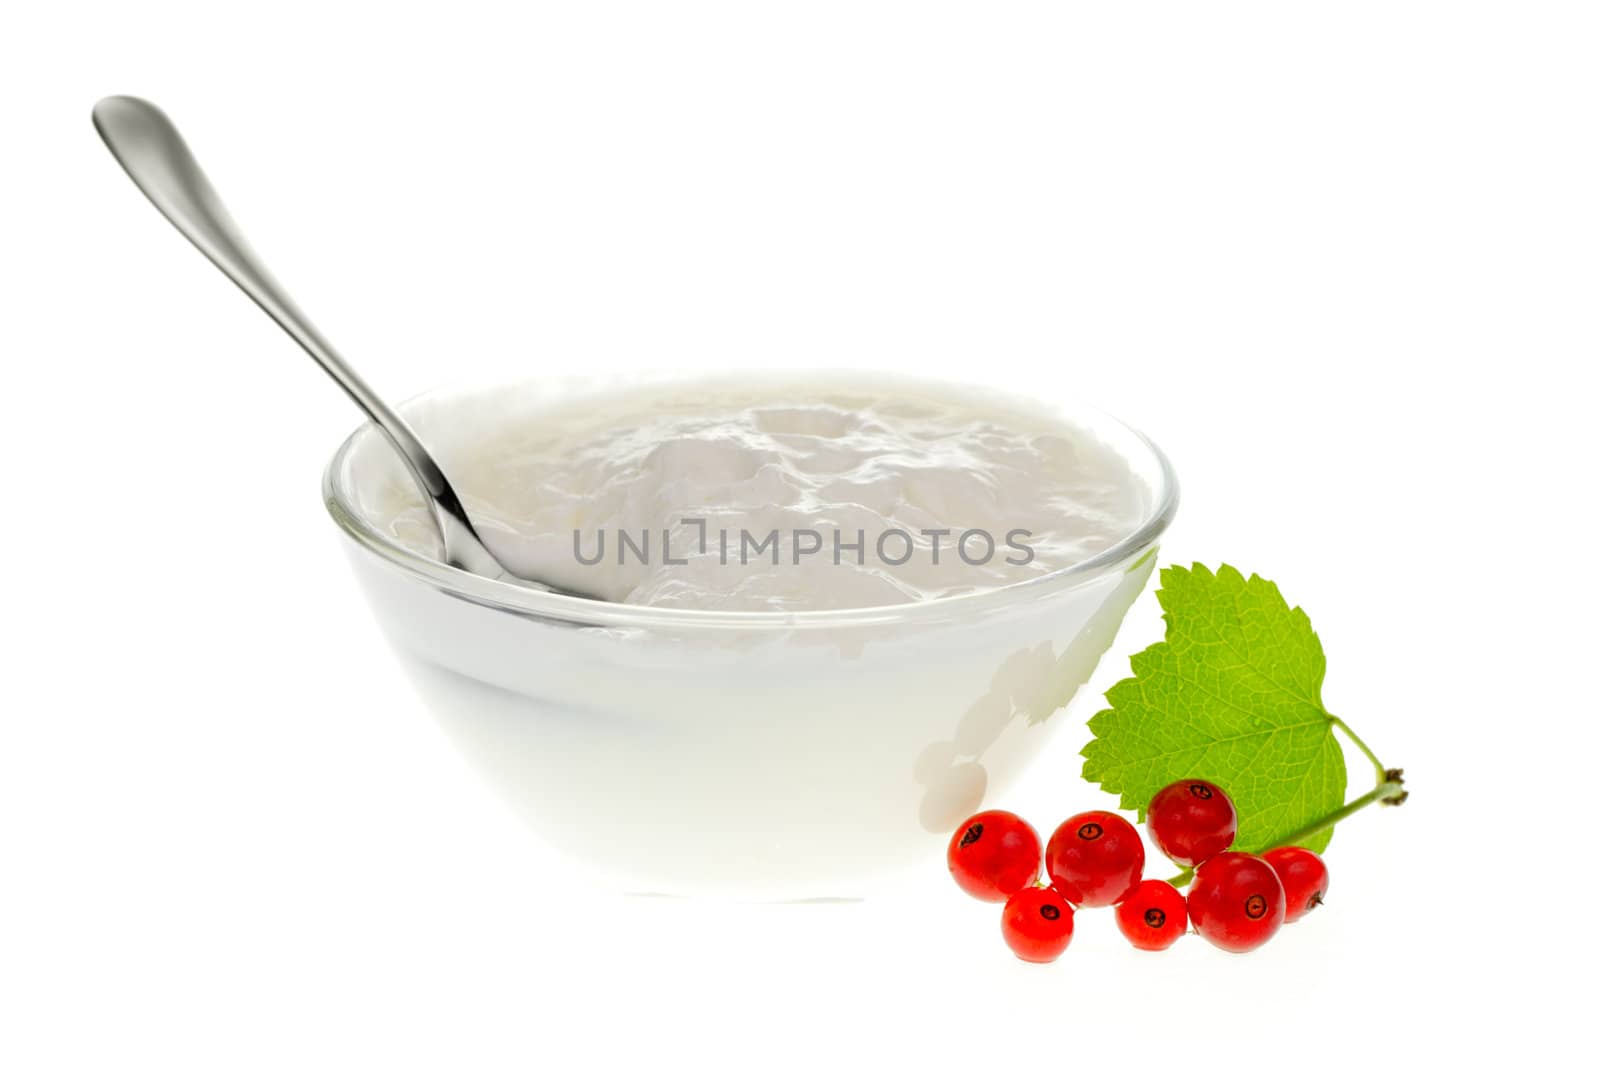 Yogurt bowl with spoon and Redcurrant berries on white background